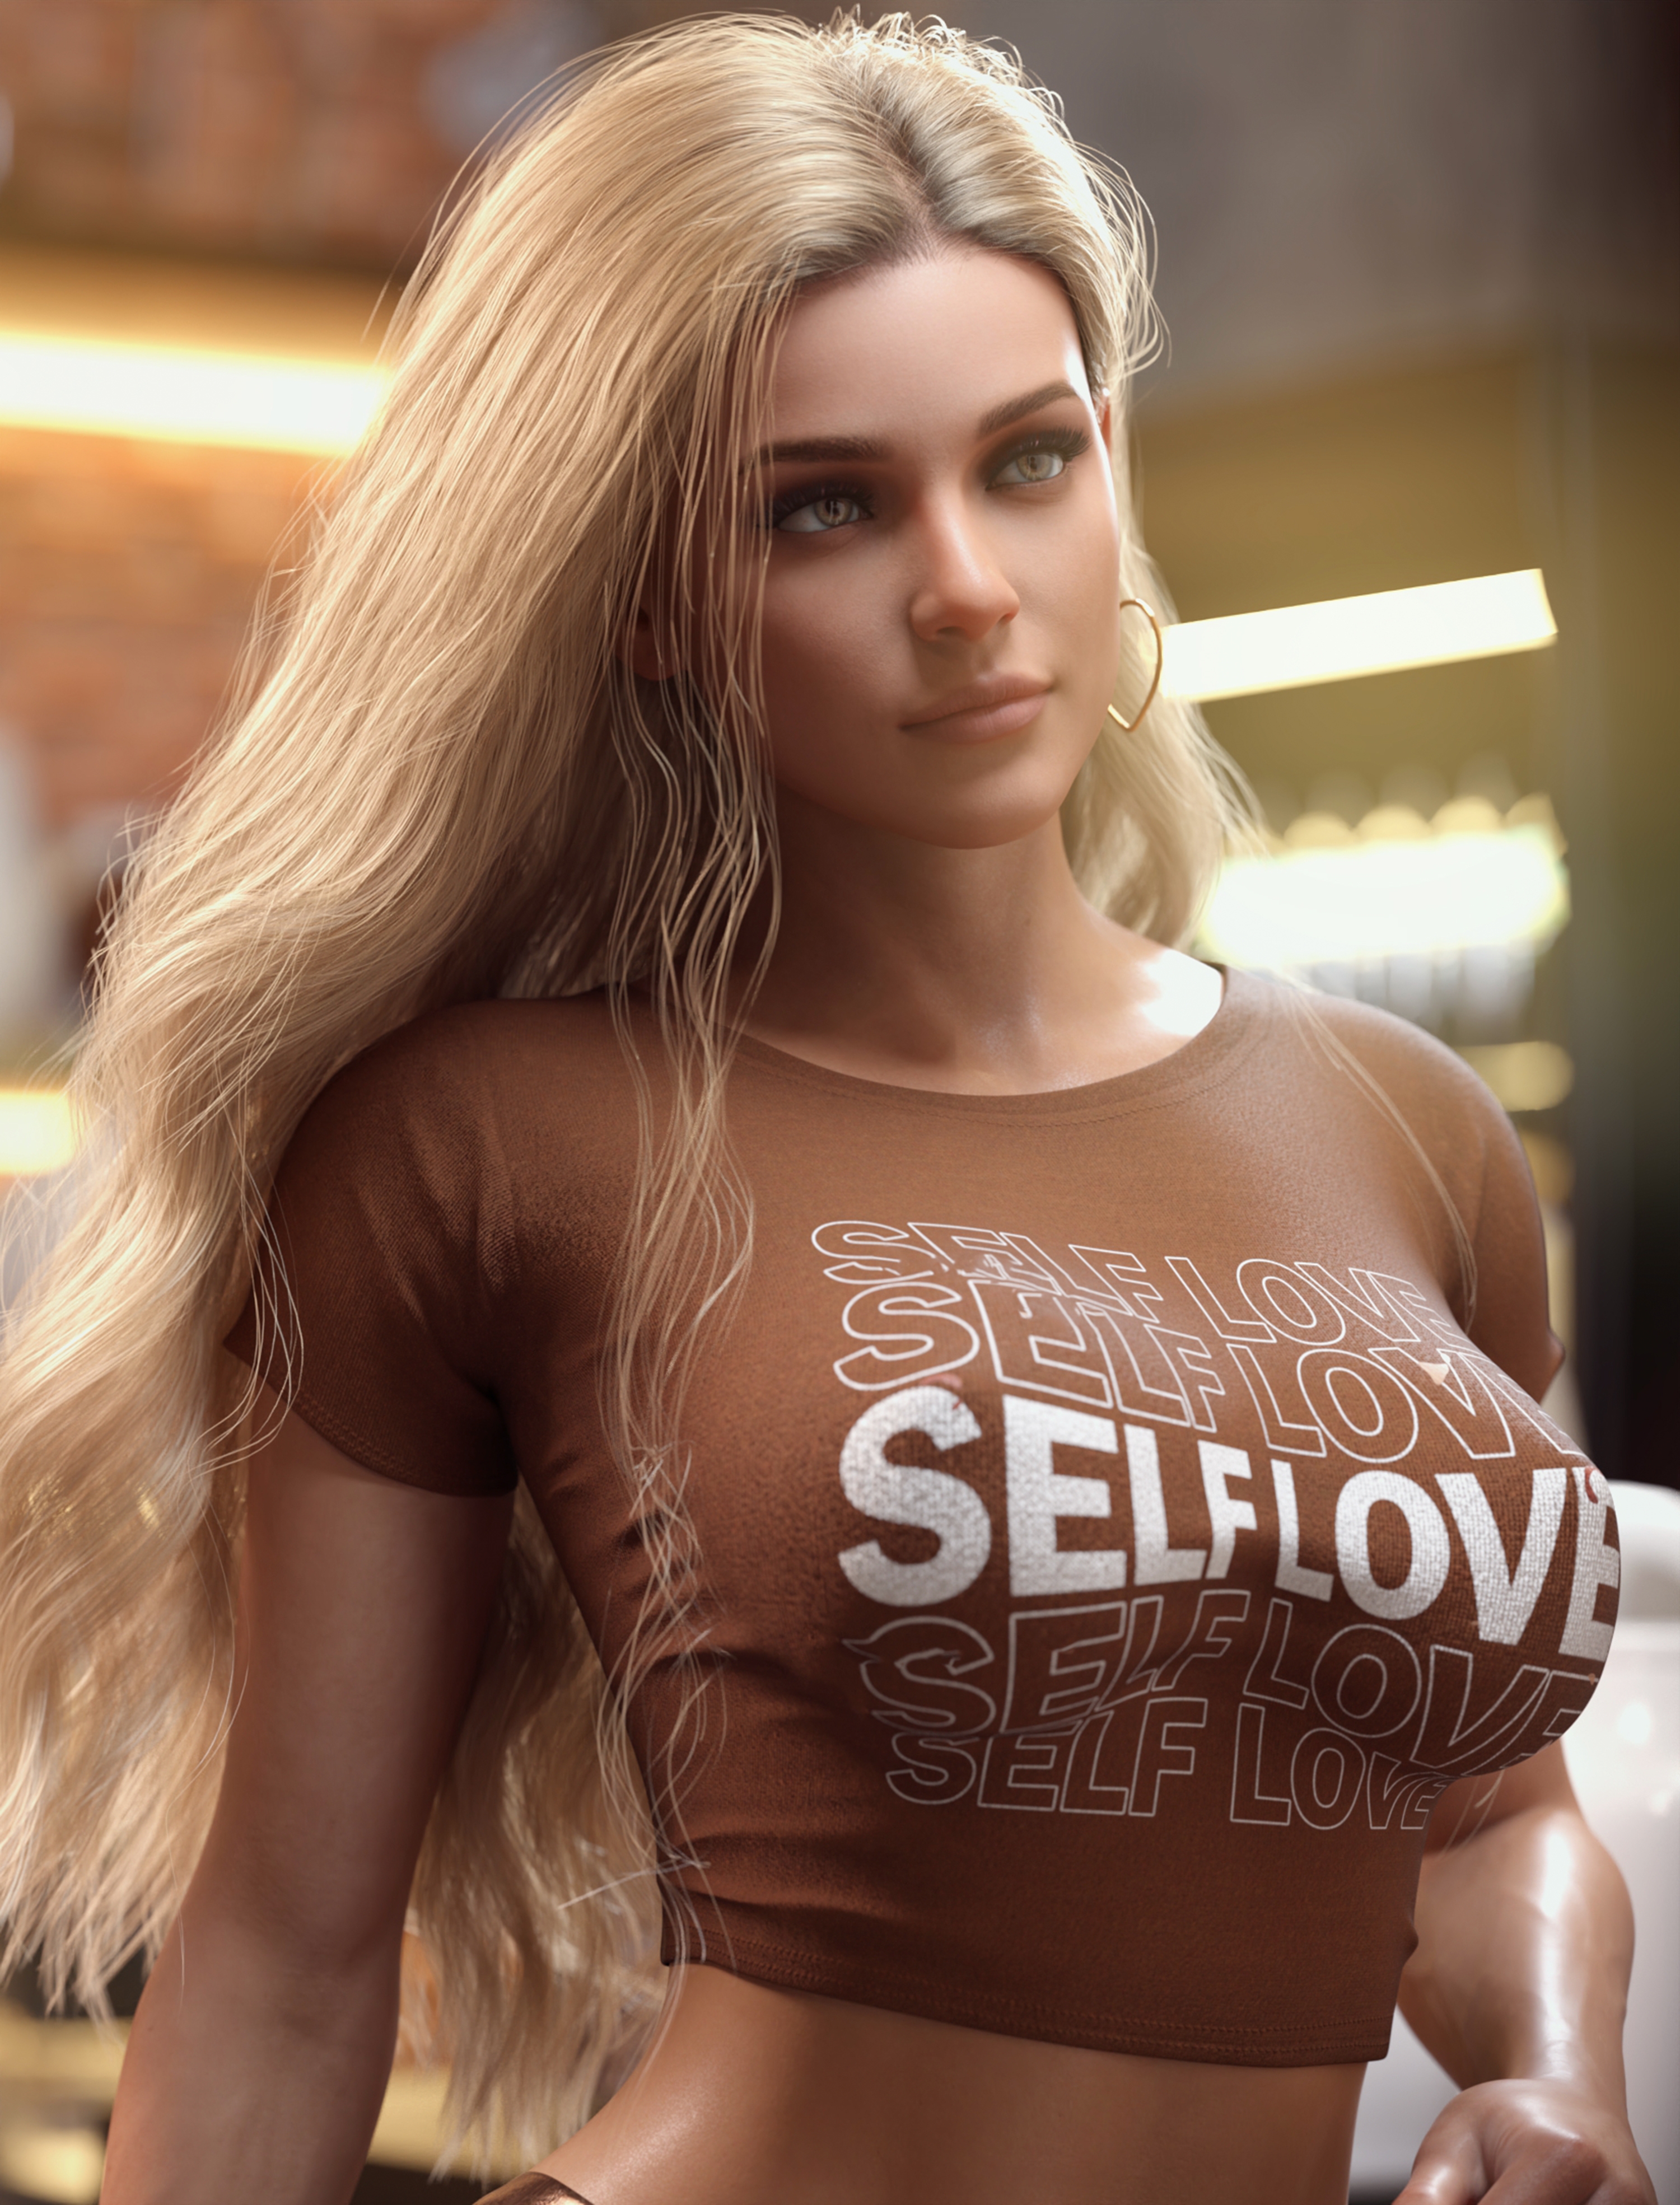 Marbella Marbella 3d Girl Blonde Sfw Outfit